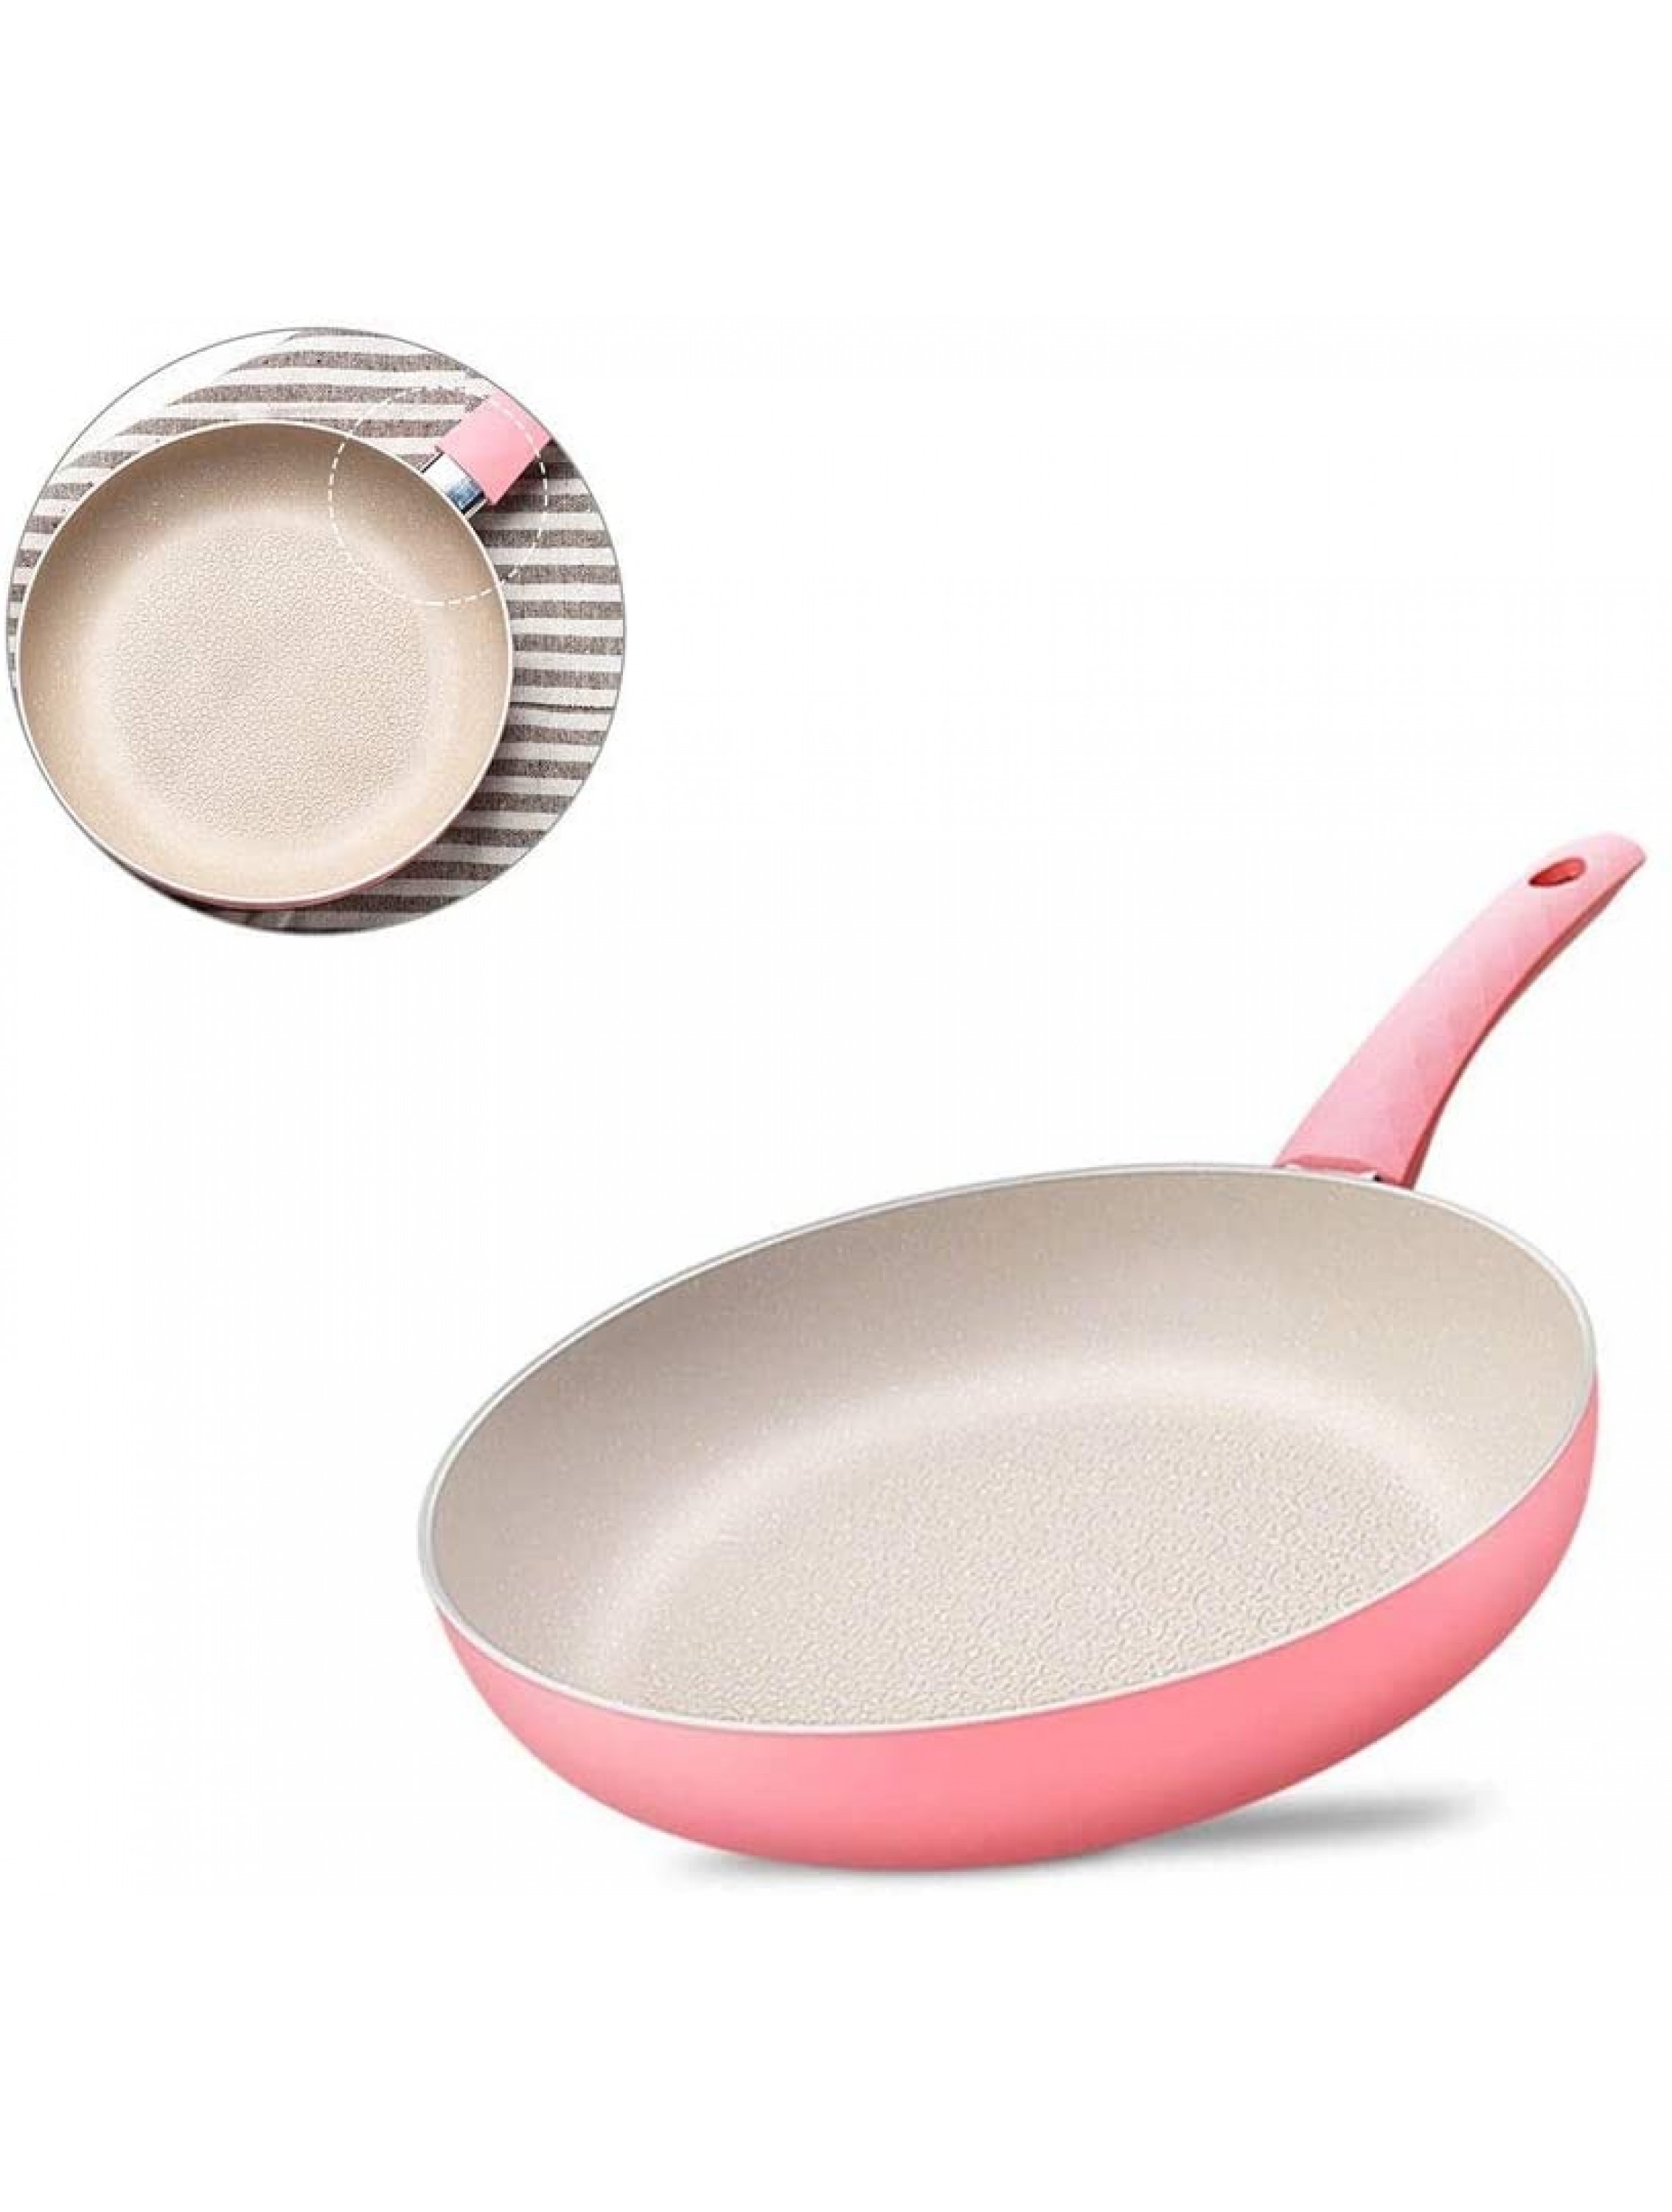 HOLPPO-URG 9.7 11Inch Frying Pan with Lid Ultra Nonstick Small Frying Pan with Ceramic Titanium Coating Nonstick 9.7 11Inch Induction Compatible Copper HOLPPO-URG Size : 24cm - BHYXPRR3M